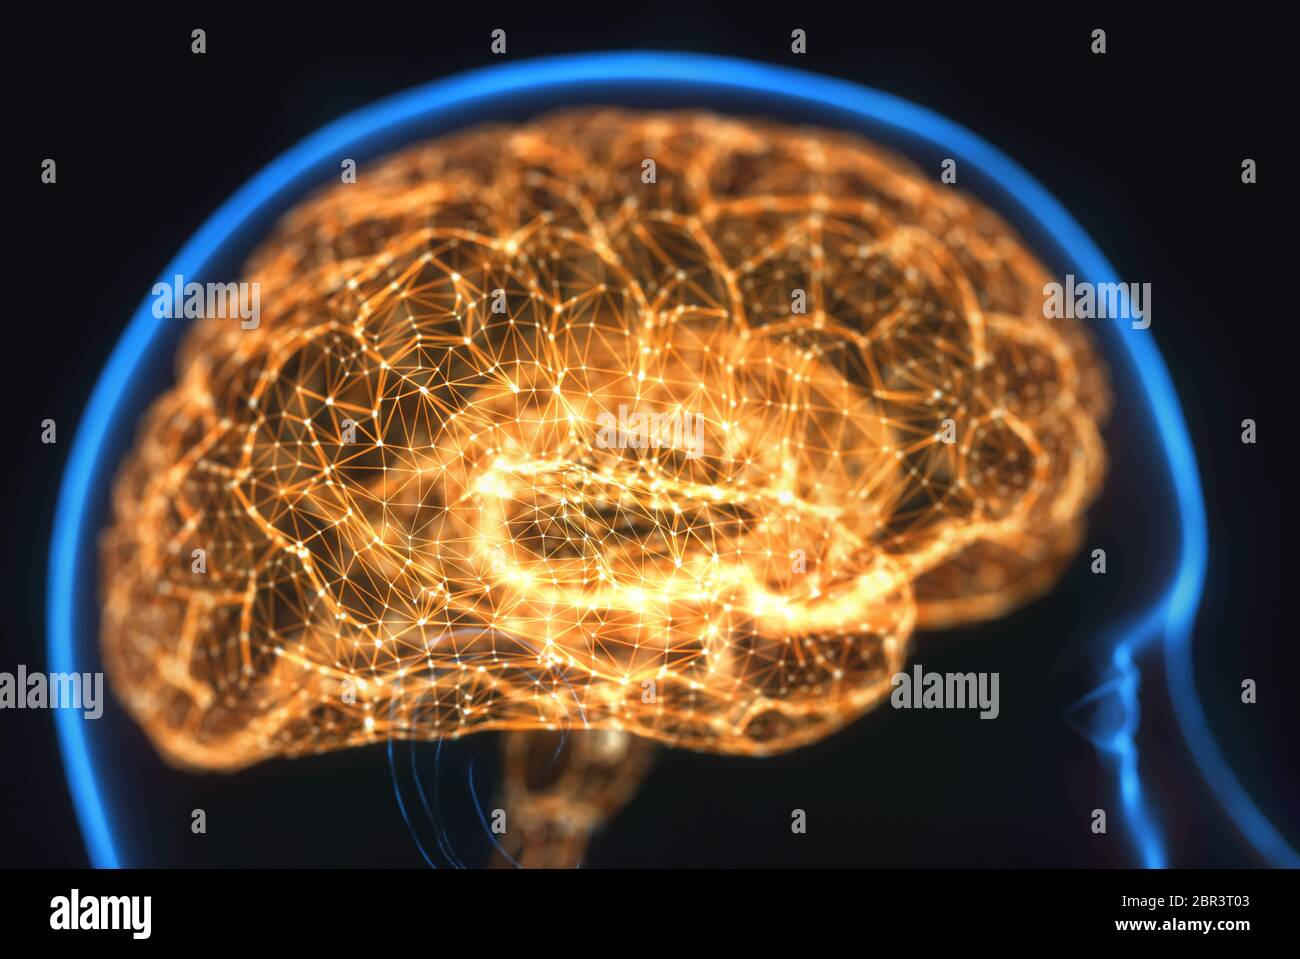 3D illustration. X-ray of the head and human brain in concept of neural connections and electrical pulses. Stock Photo